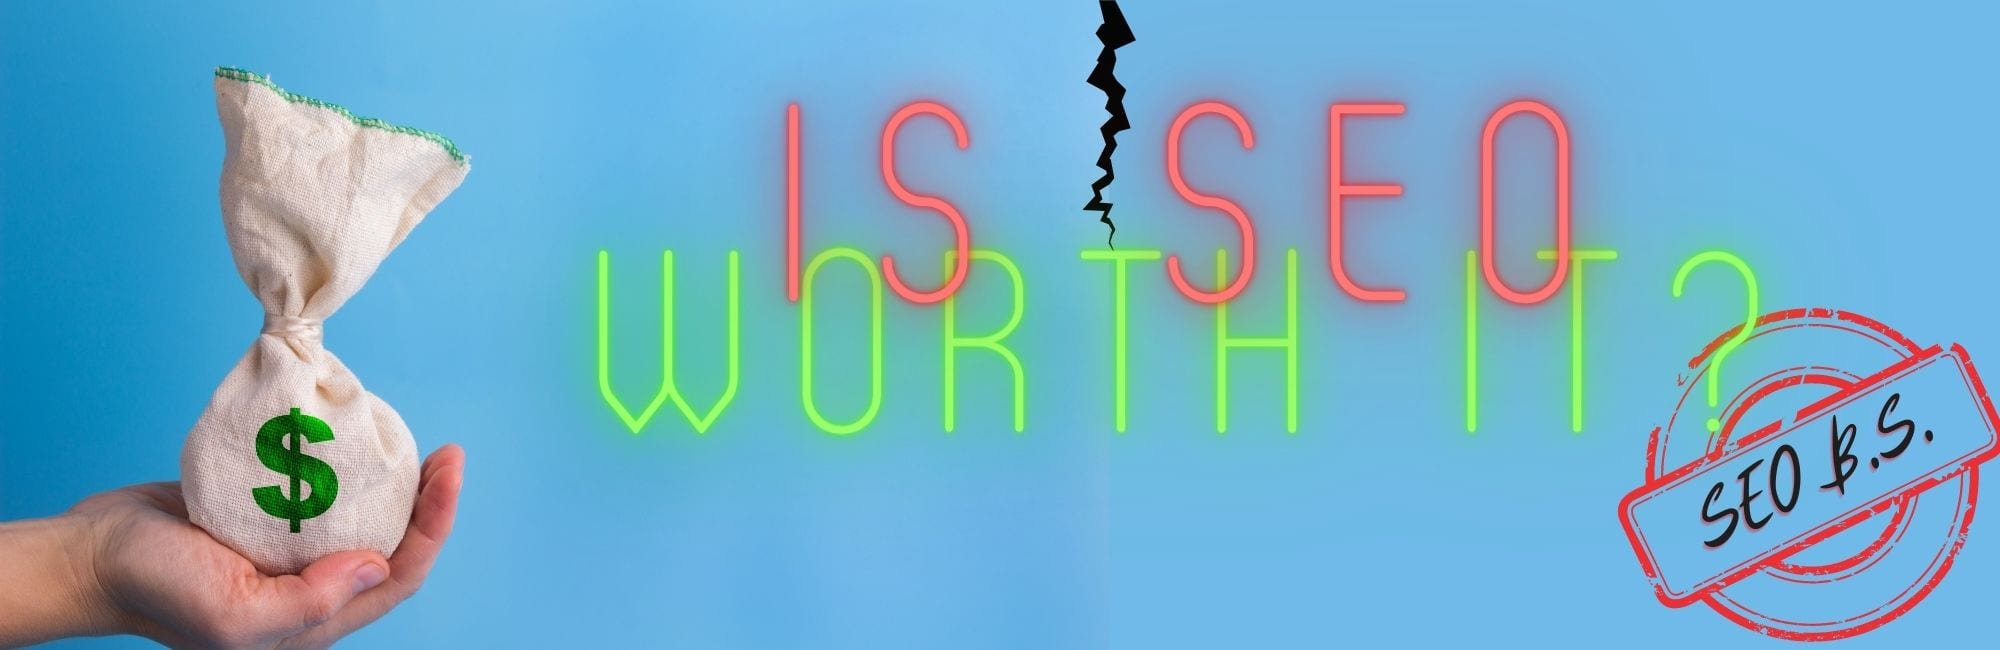 picture of is seo worth it banner